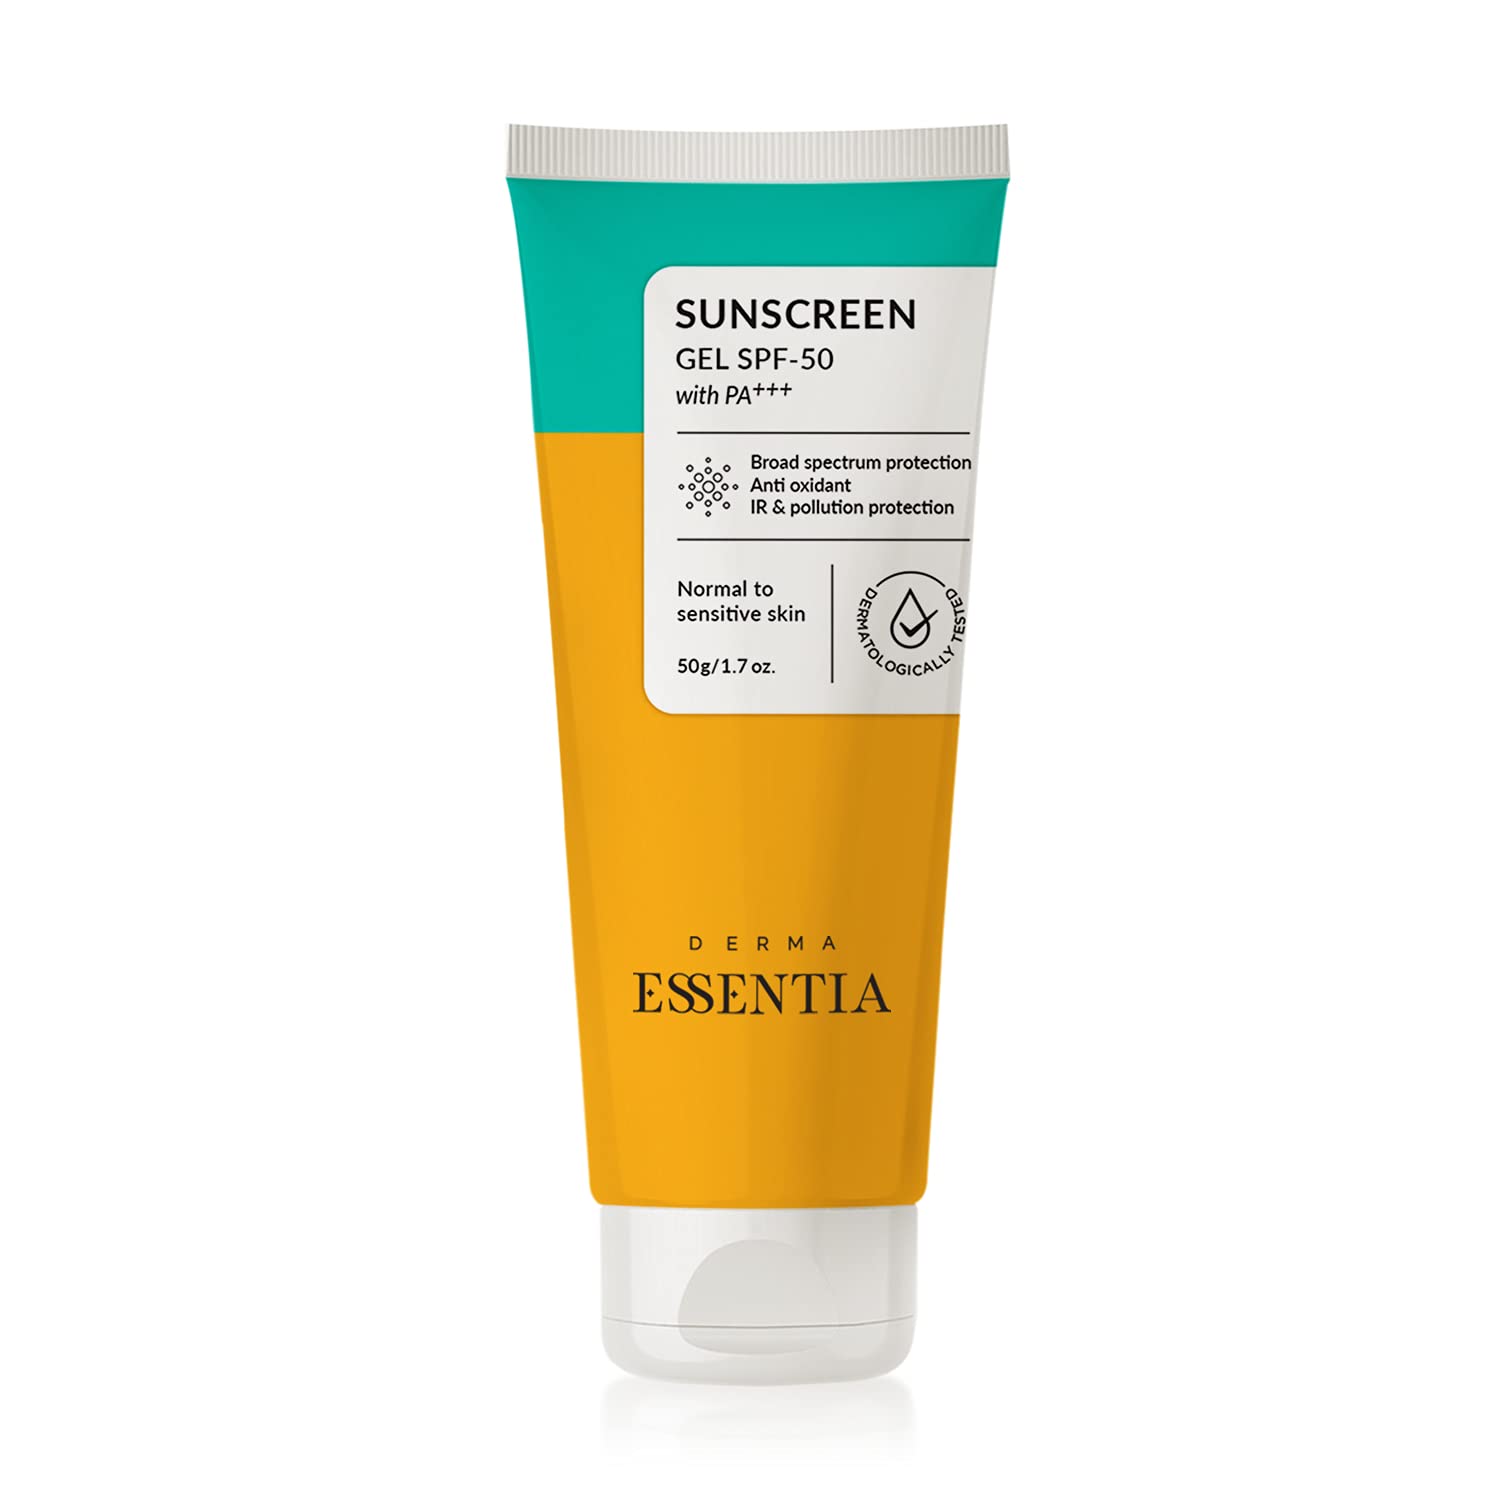 10 Best Sunscreen Recommended By Dermatologists in India